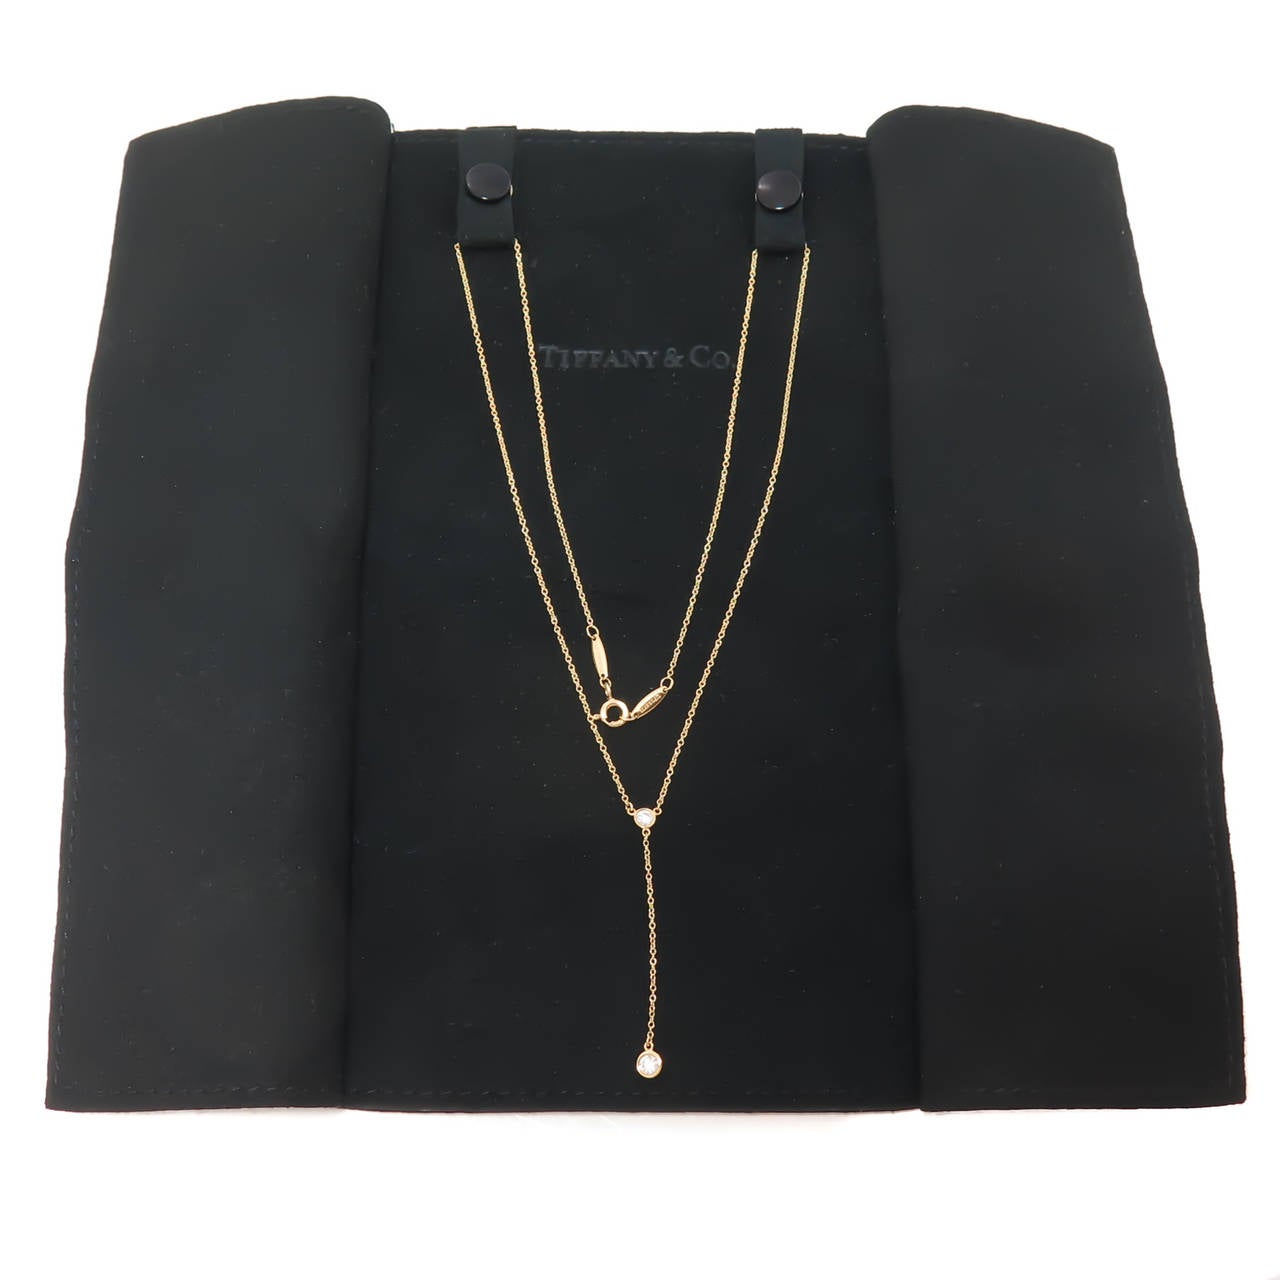 Circa 2014 Elsa Peretti for Tiffany & Company Diamonds by the Yard Drop Necklace. 18K Yellow Gold with two round Brilliant cut Diamonds totaling .19 Carat. Total Length 19 Inch. Original Presentation Fold.